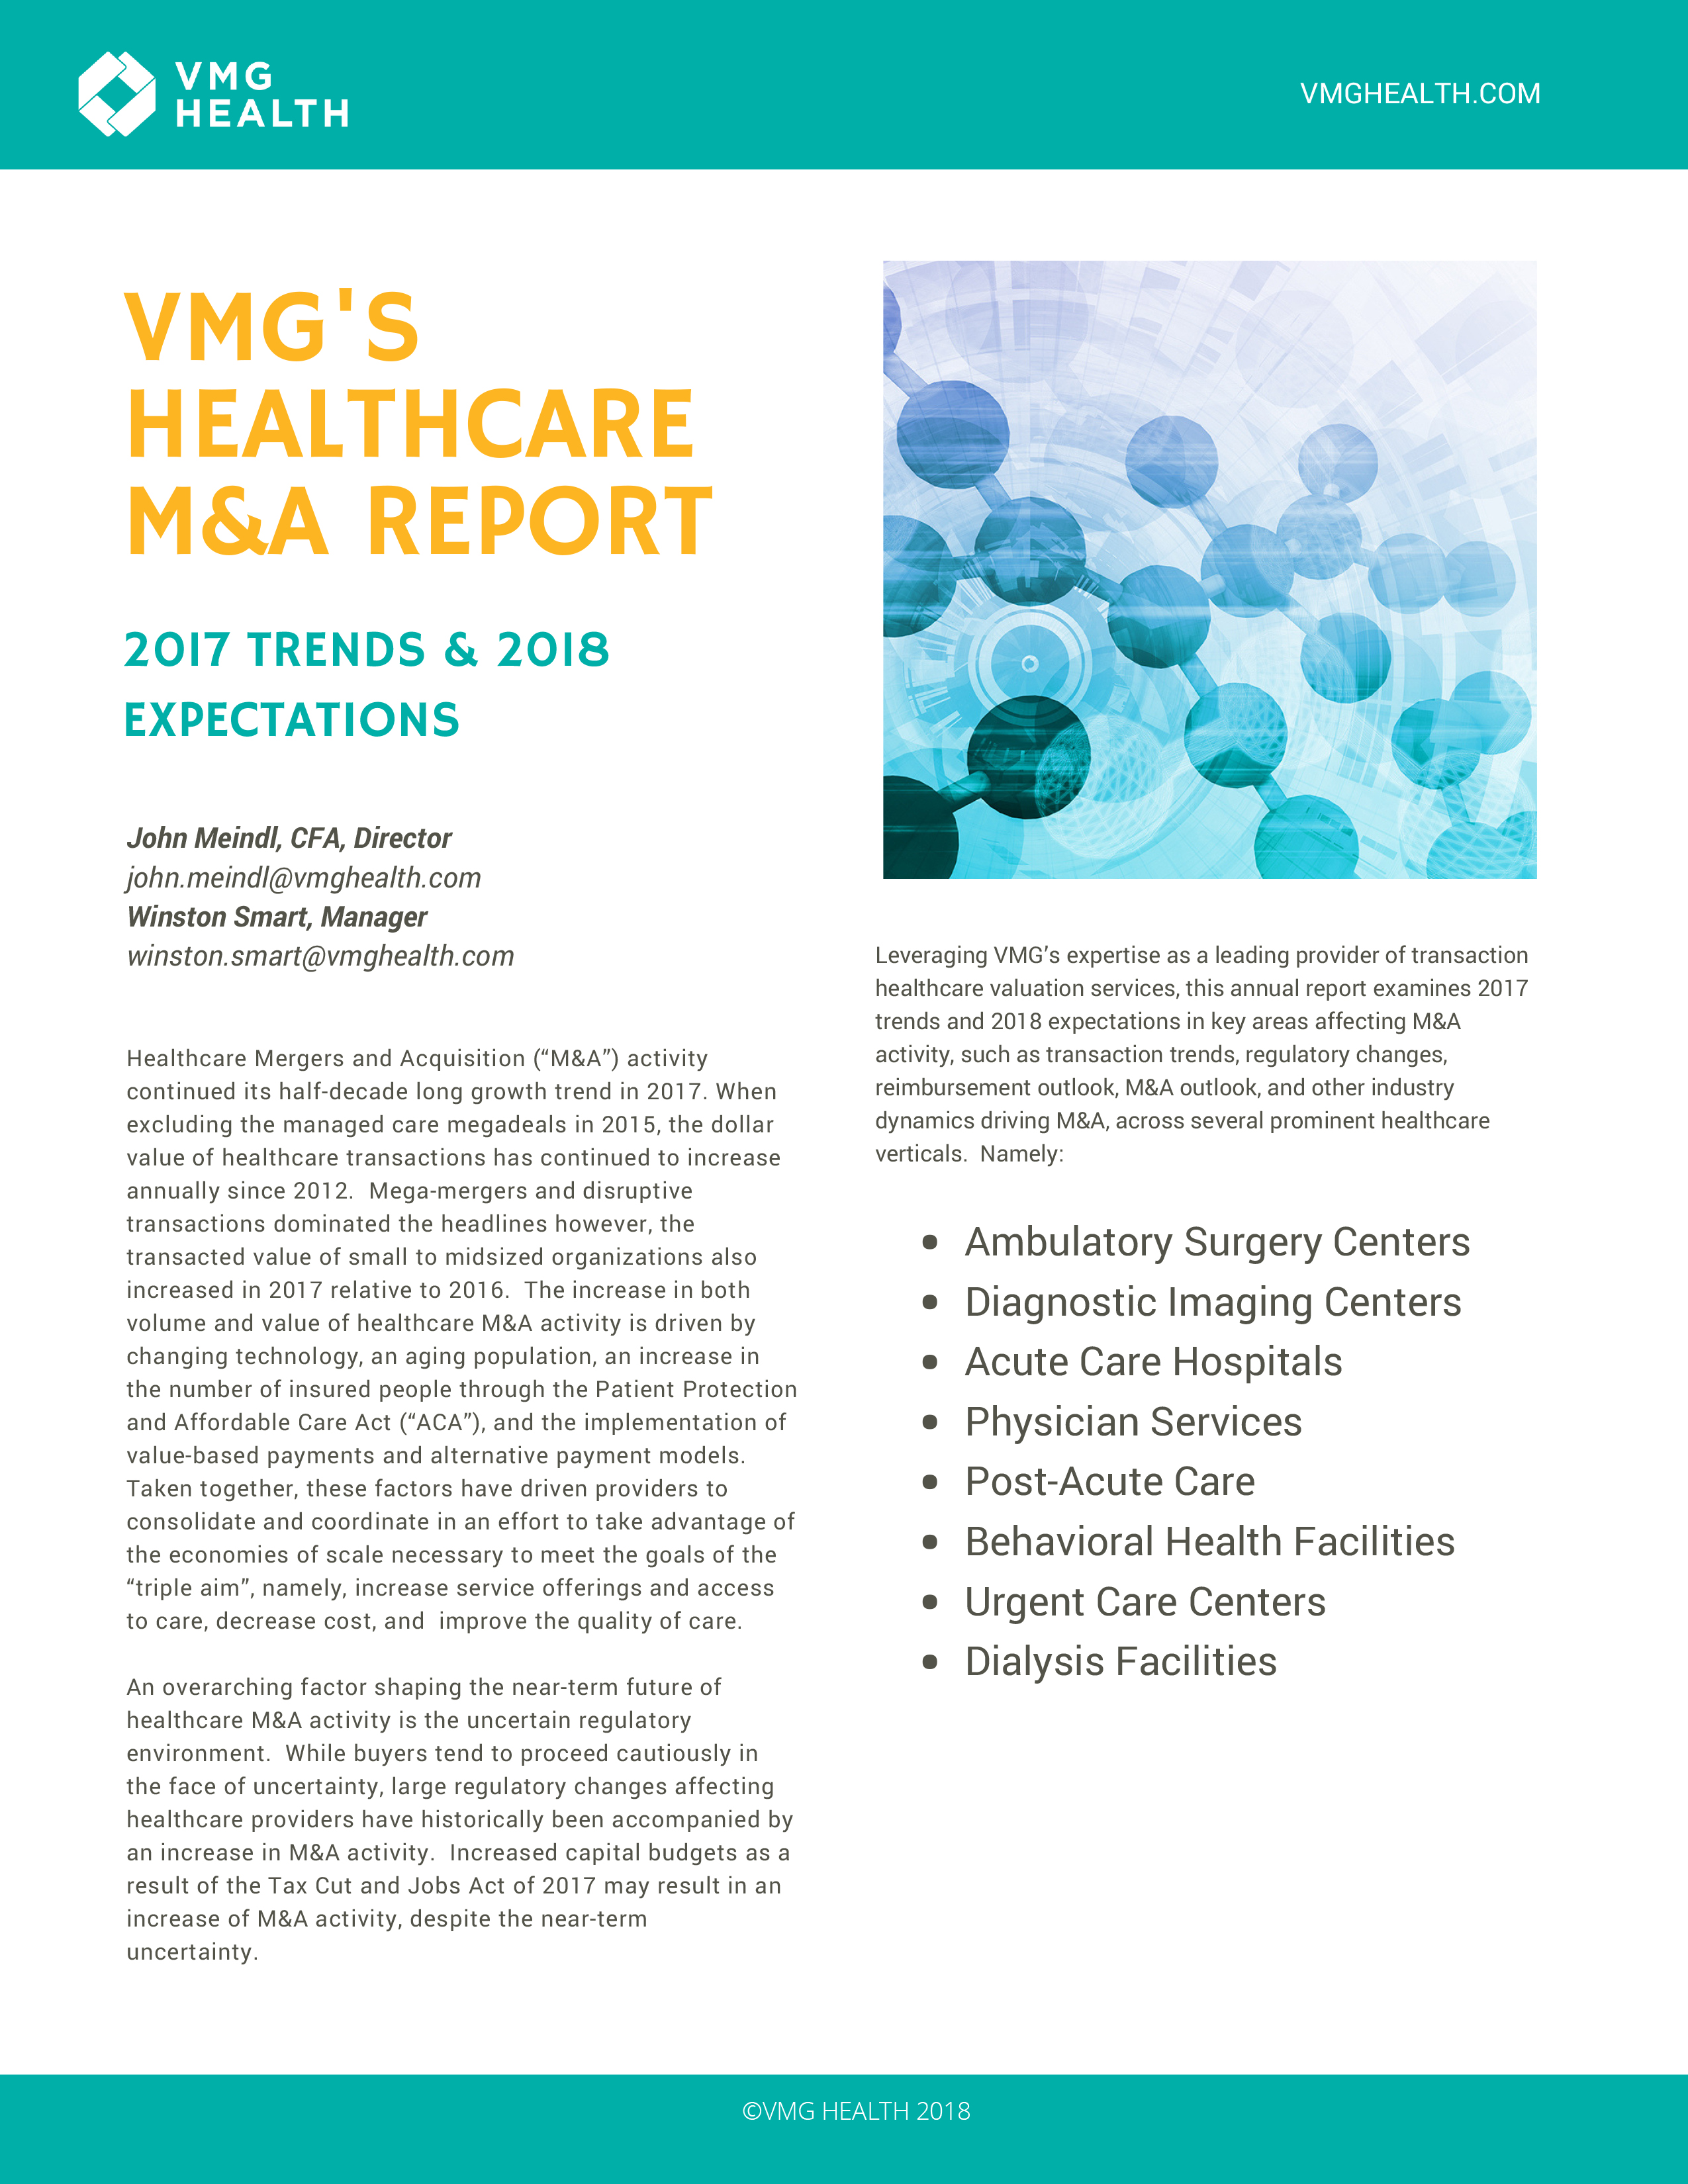 Healthcare M&A Report: 2017 Trends & 2018 Expectations